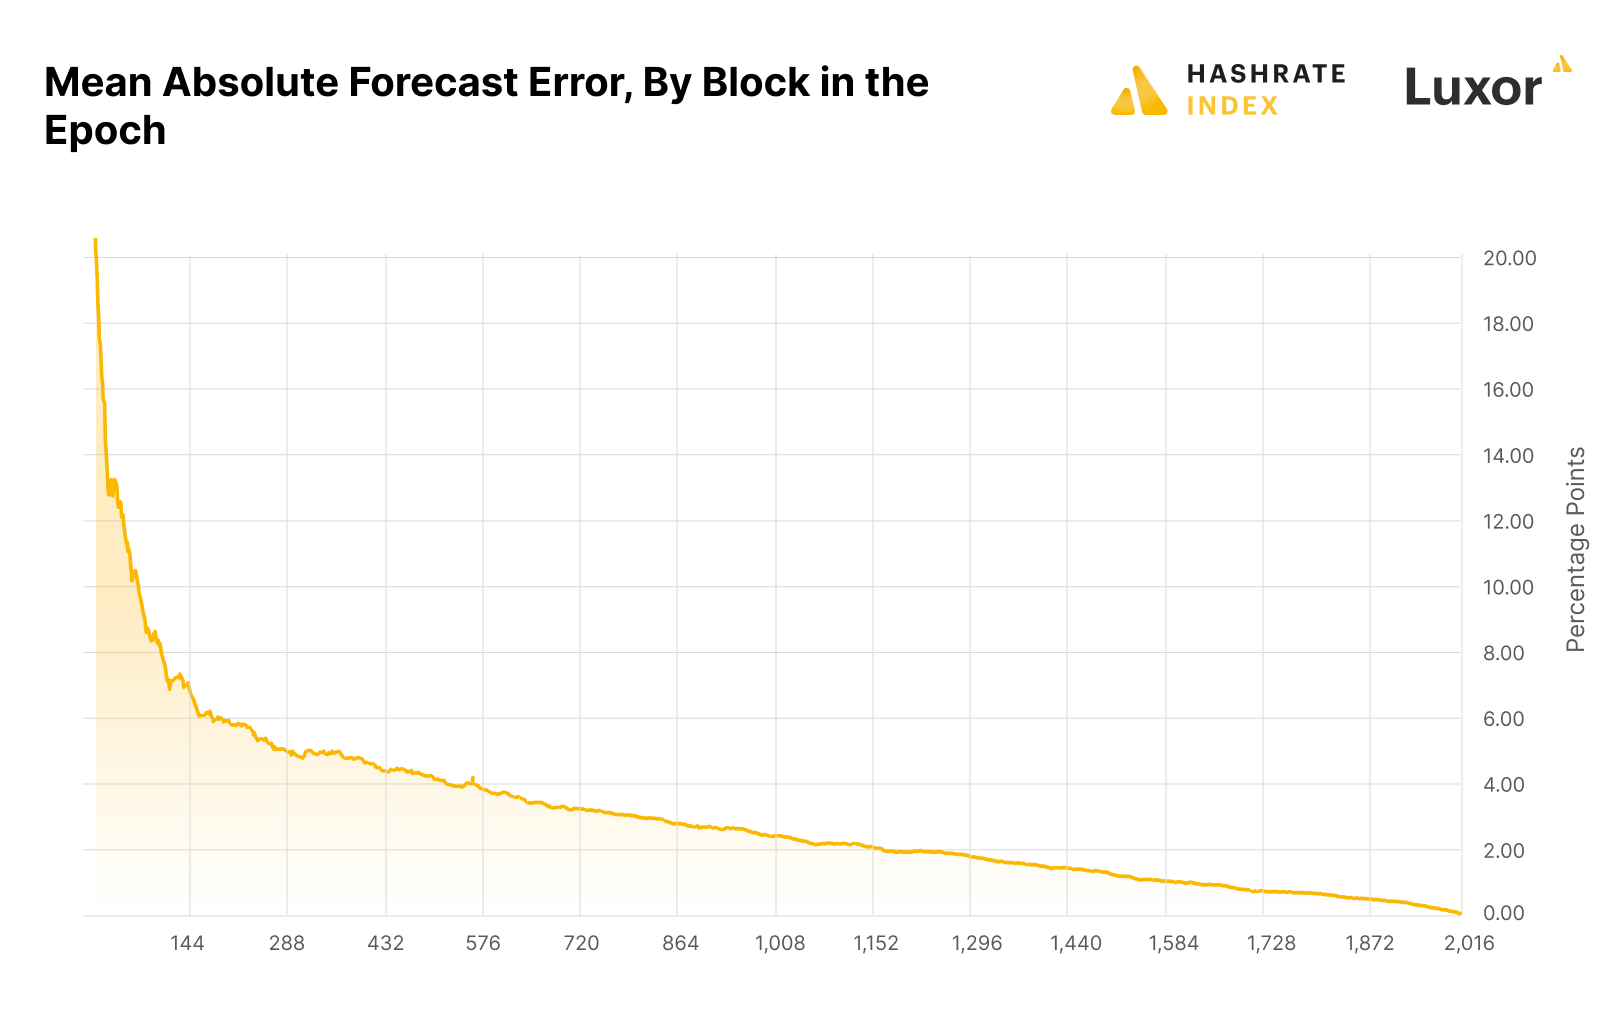 MAFE for Bitcoin difficulty adjustment estimation in a recent difficulty epoch | Source: Hashrate Index